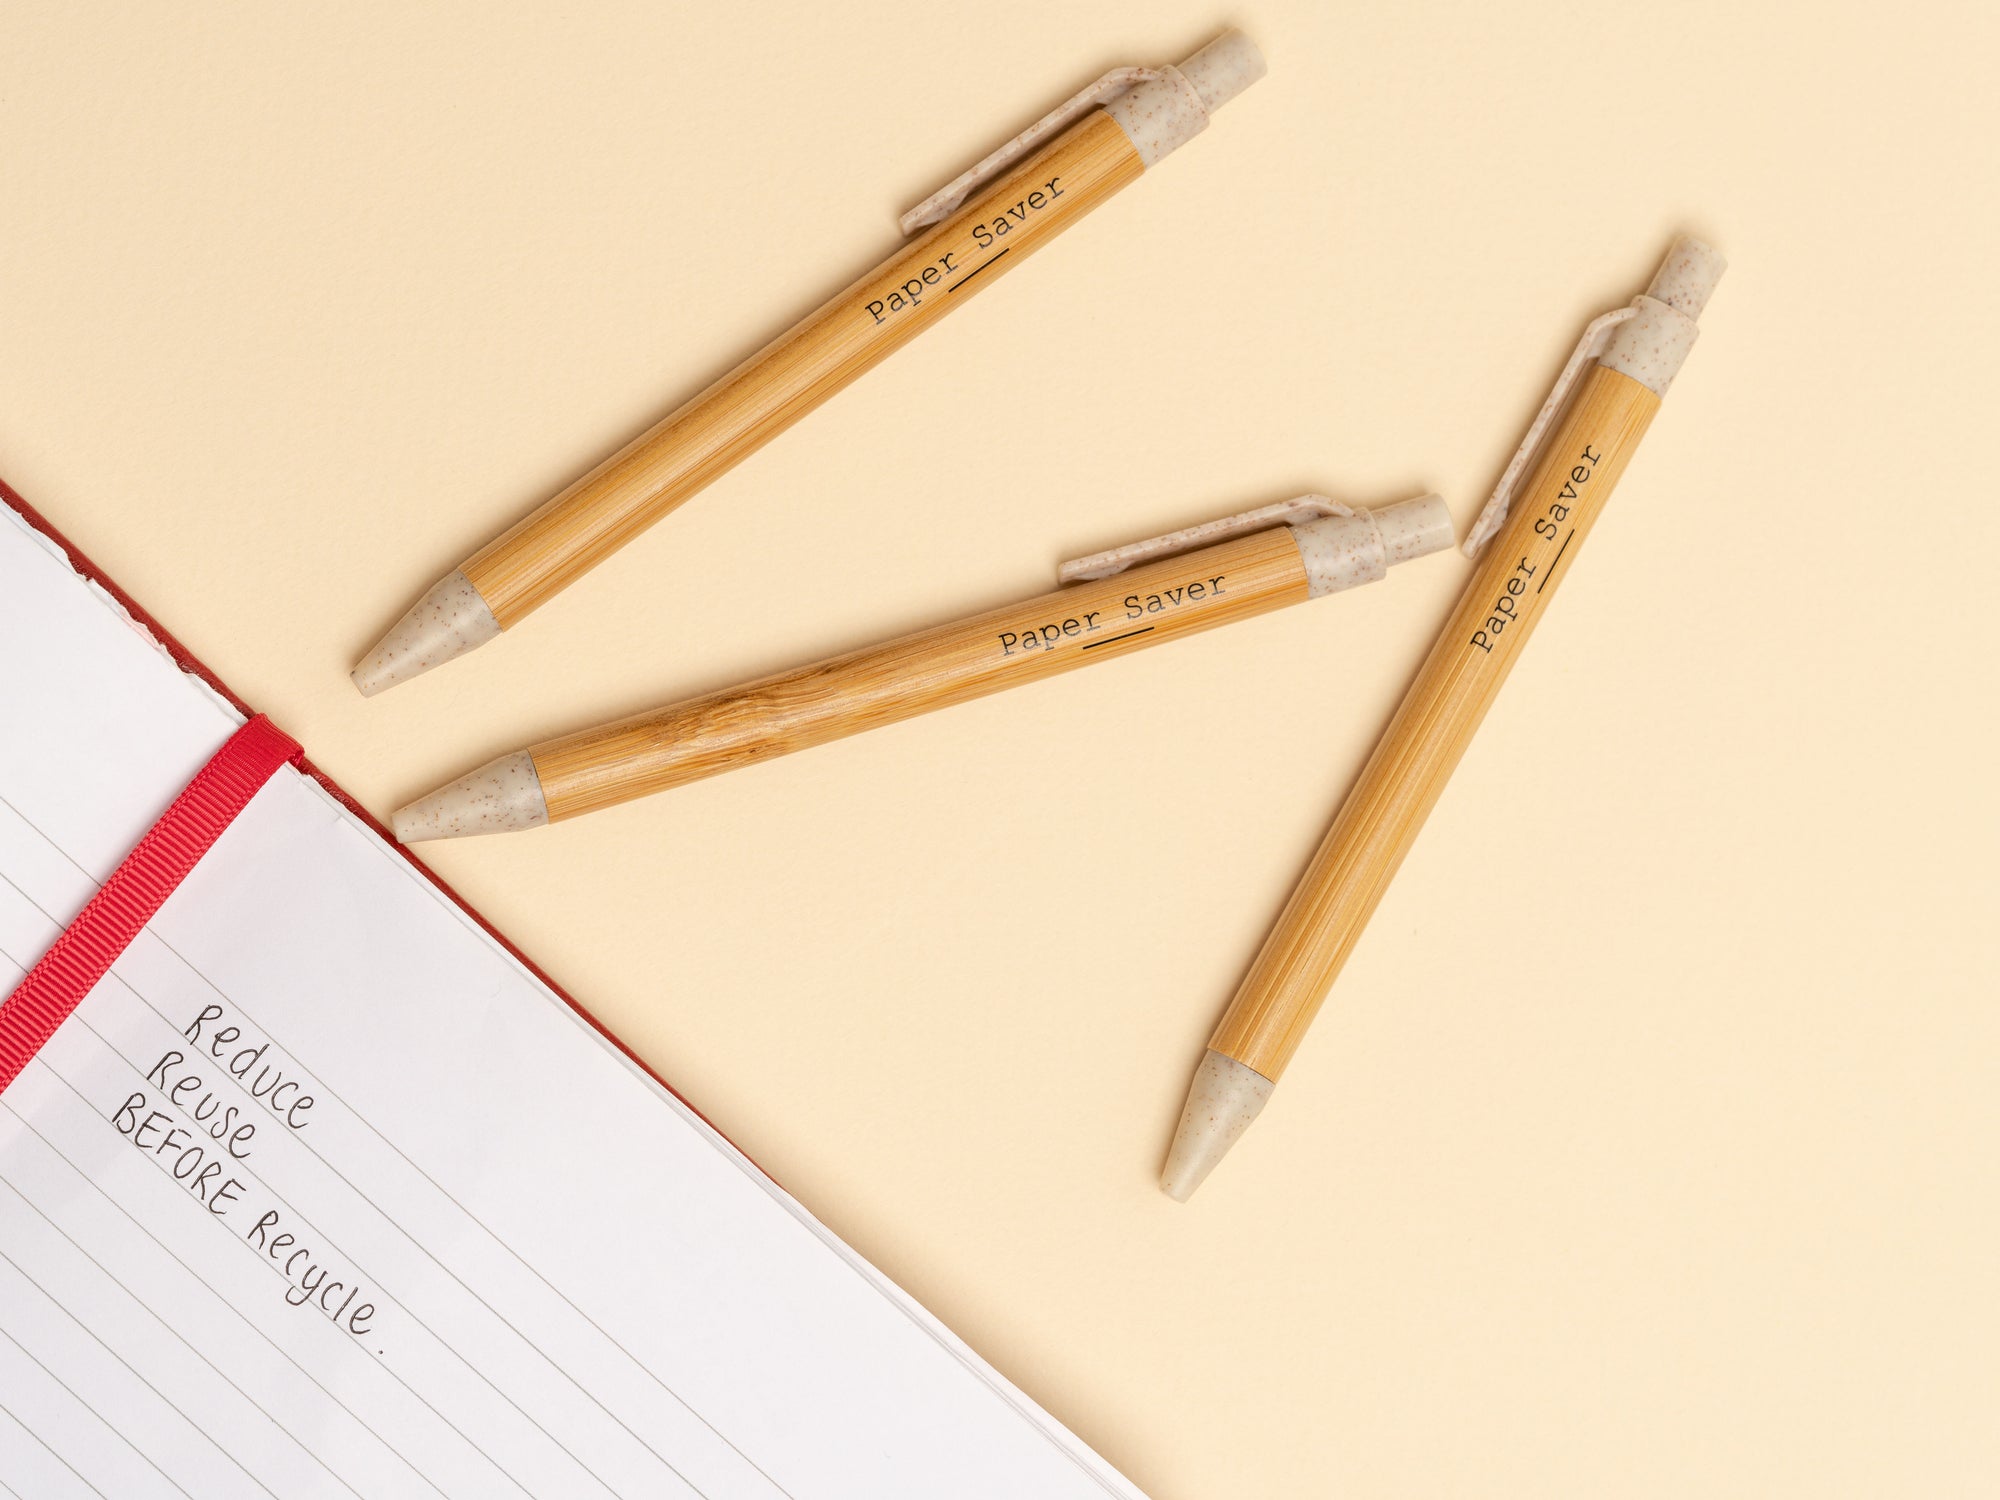 The Paper Saver Reusable Pens are more eco-friendly as they are refillable and made of bamboo which is more sustainable than pens made of paper or cardboard.